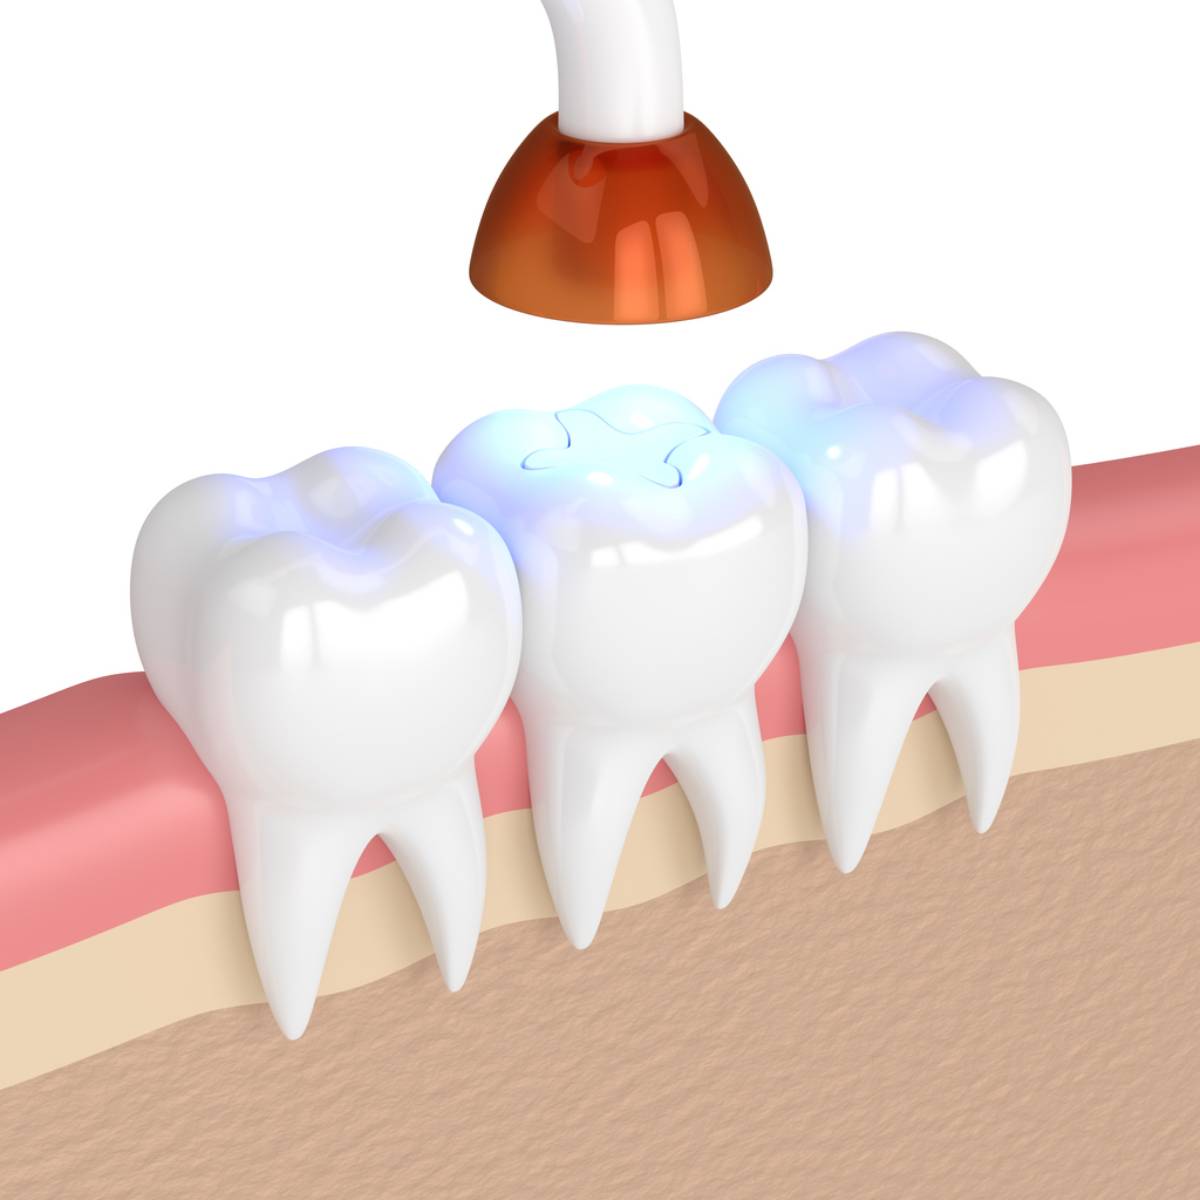 featured image for pros and cons of composite fillings